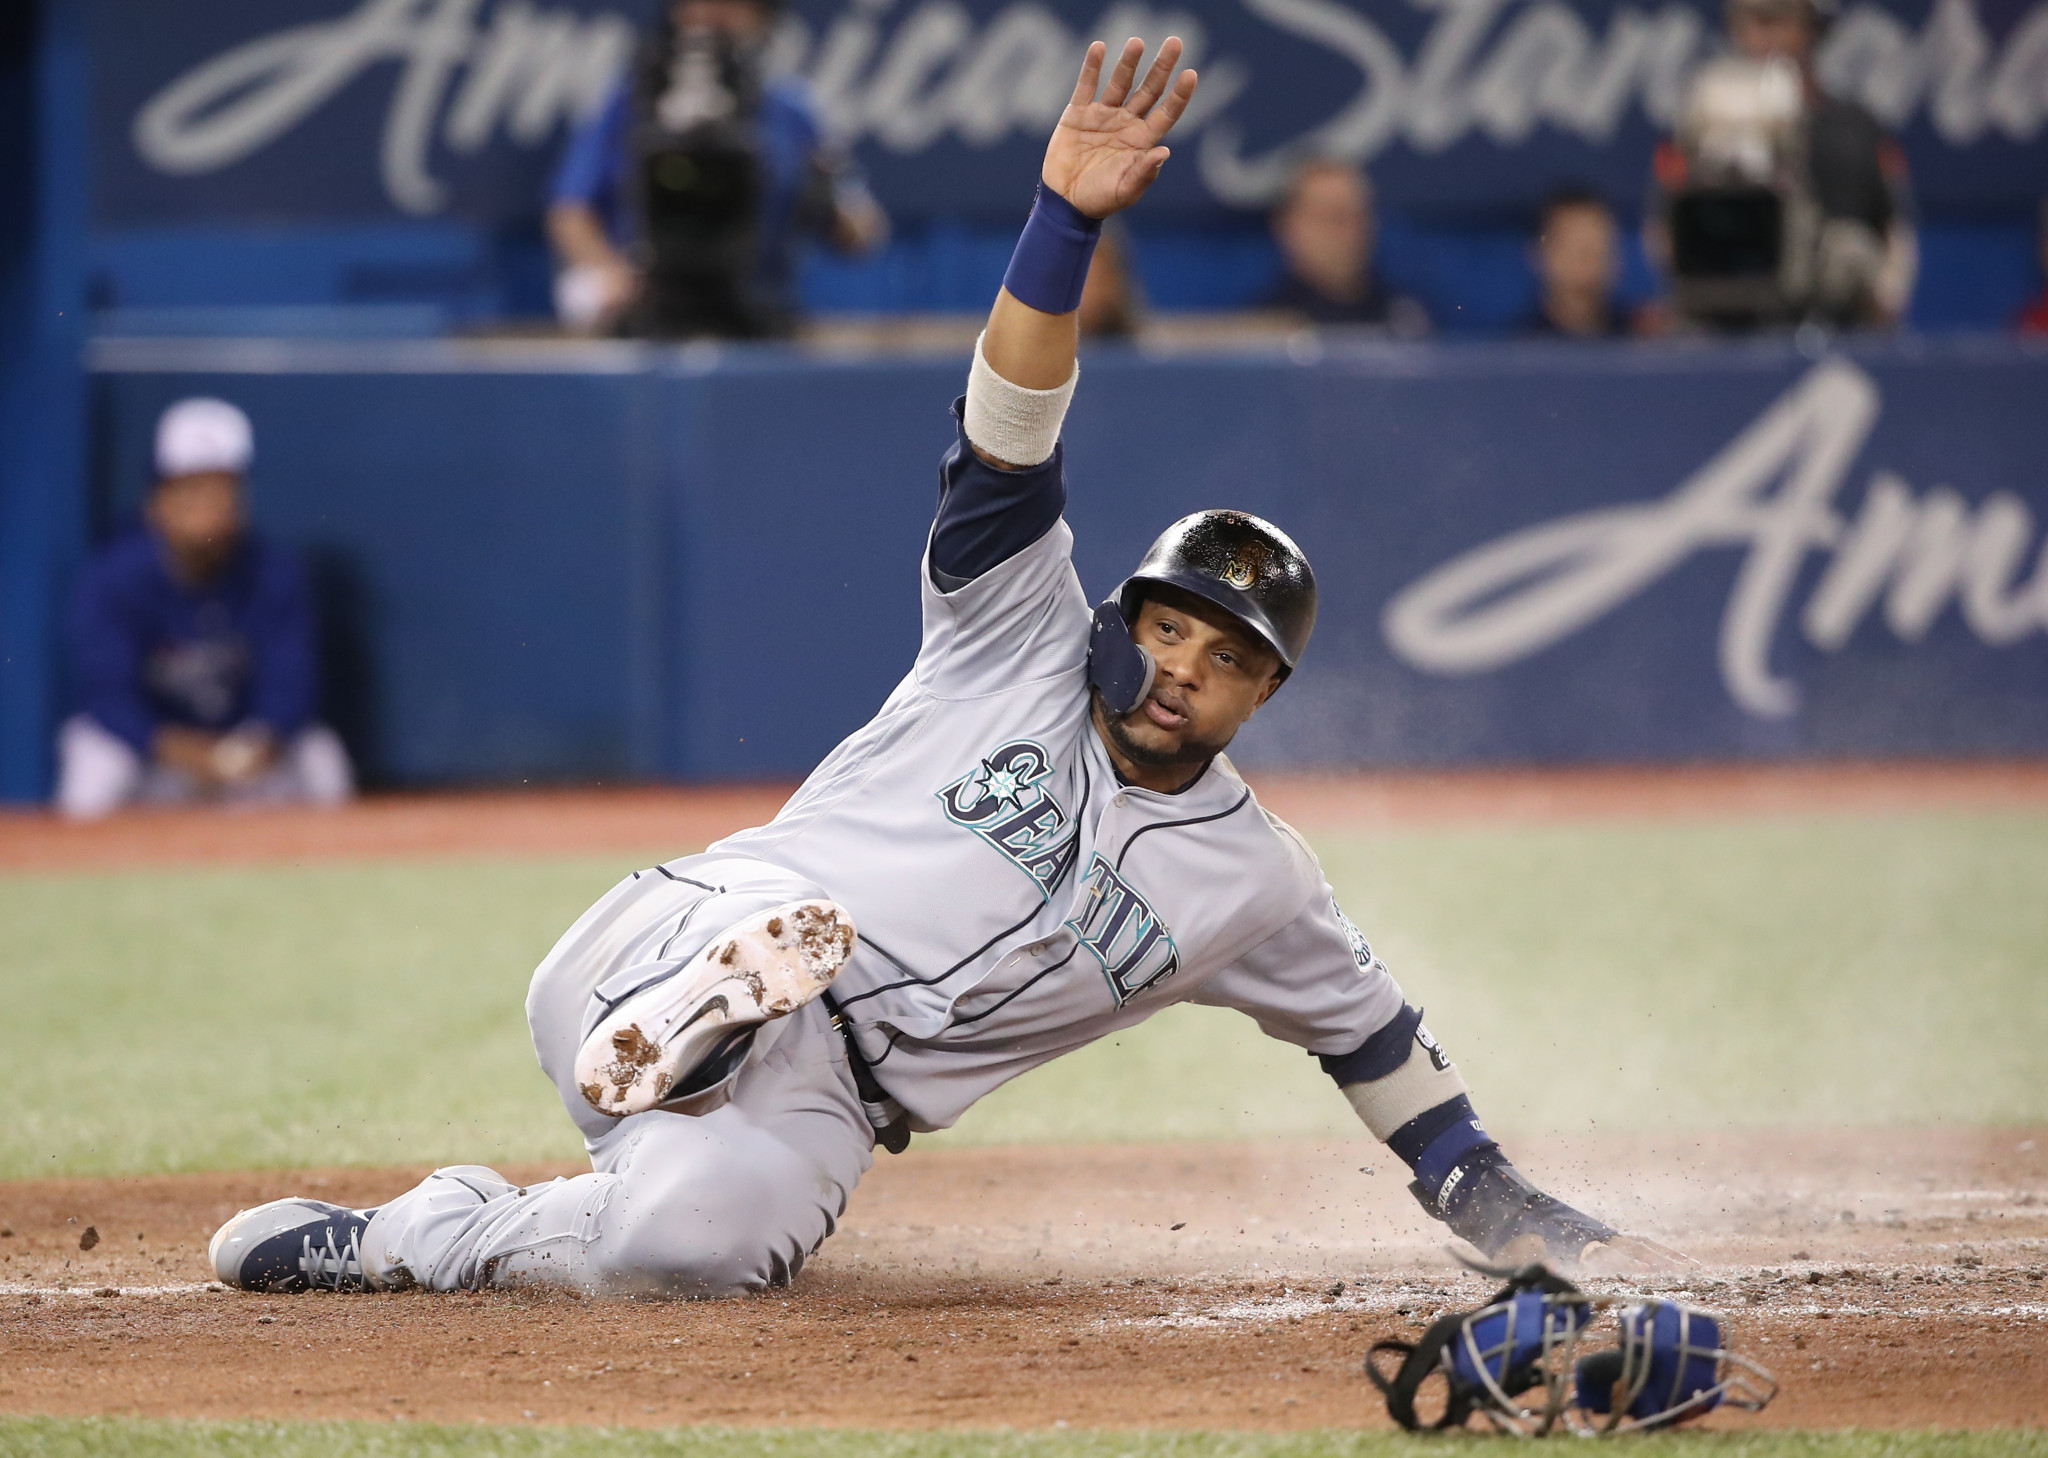 Major League Baseball star Canó accepts 80-game suspension after failed drugs test